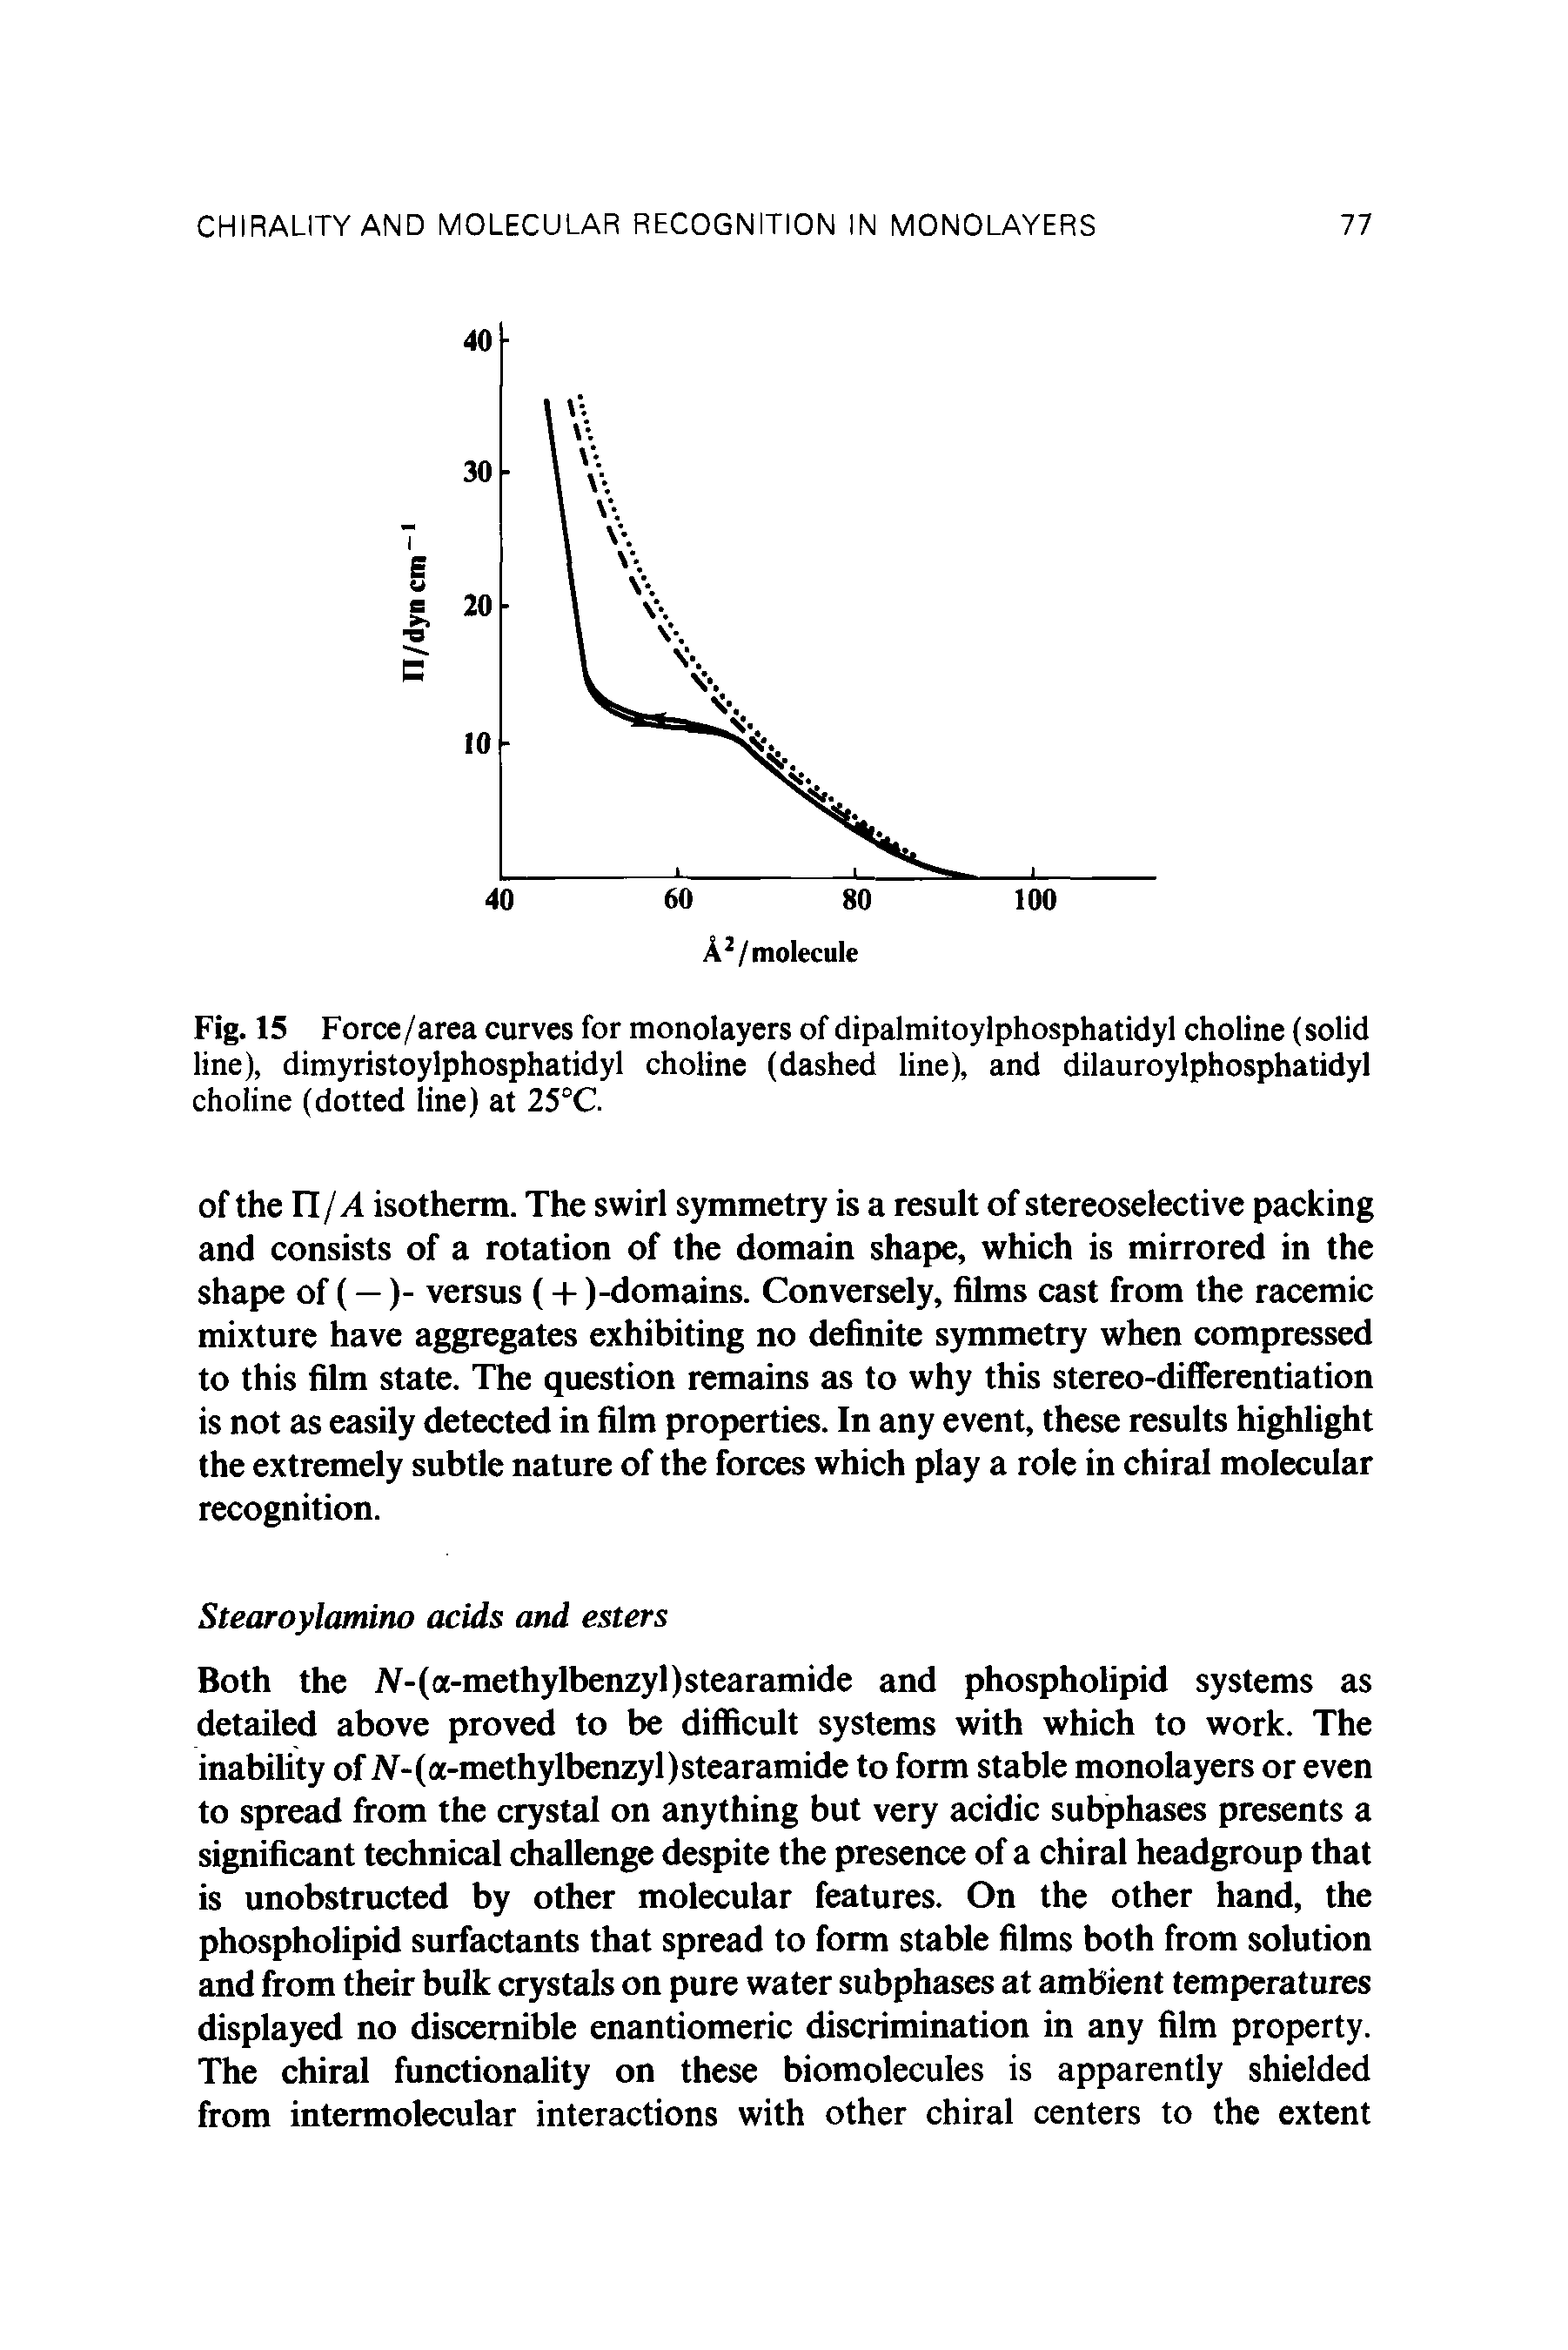 Fig. 15 Force/area curves for monolayers of dipalmitoylphosphatidyl choline (solid line), dimyristoylphosphatidyl choline (dashed line), and dilauroylphosphatidyl choline (dotted line) at 25°C.